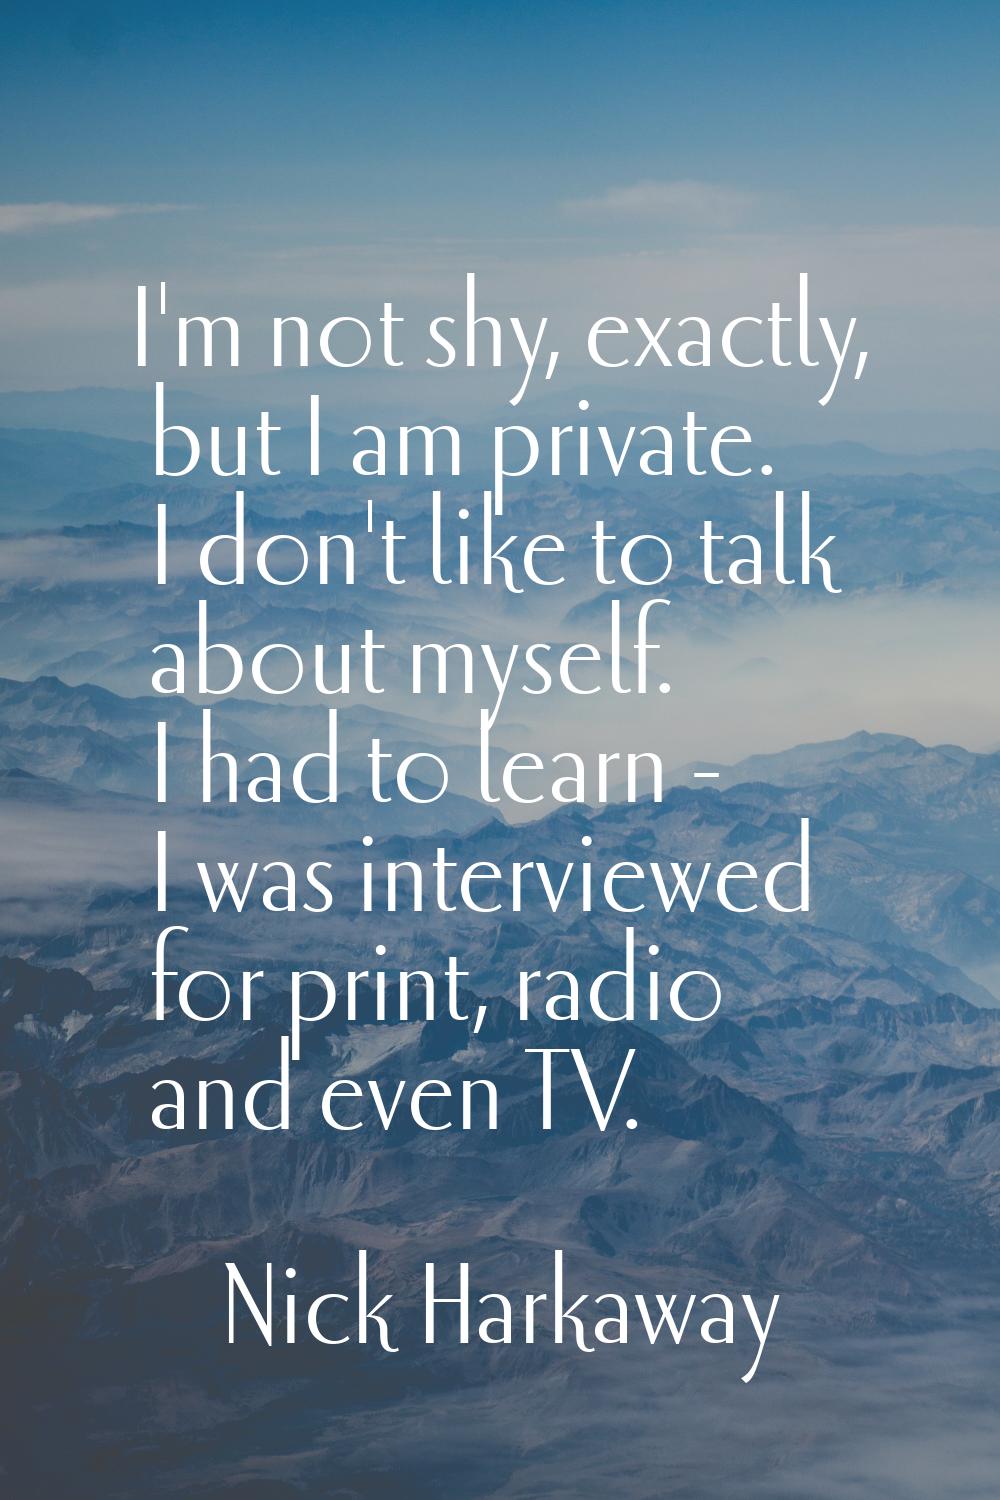 I'm not shy, exactly, but I am private. I don't like to talk about myself. I had to learn - I was i